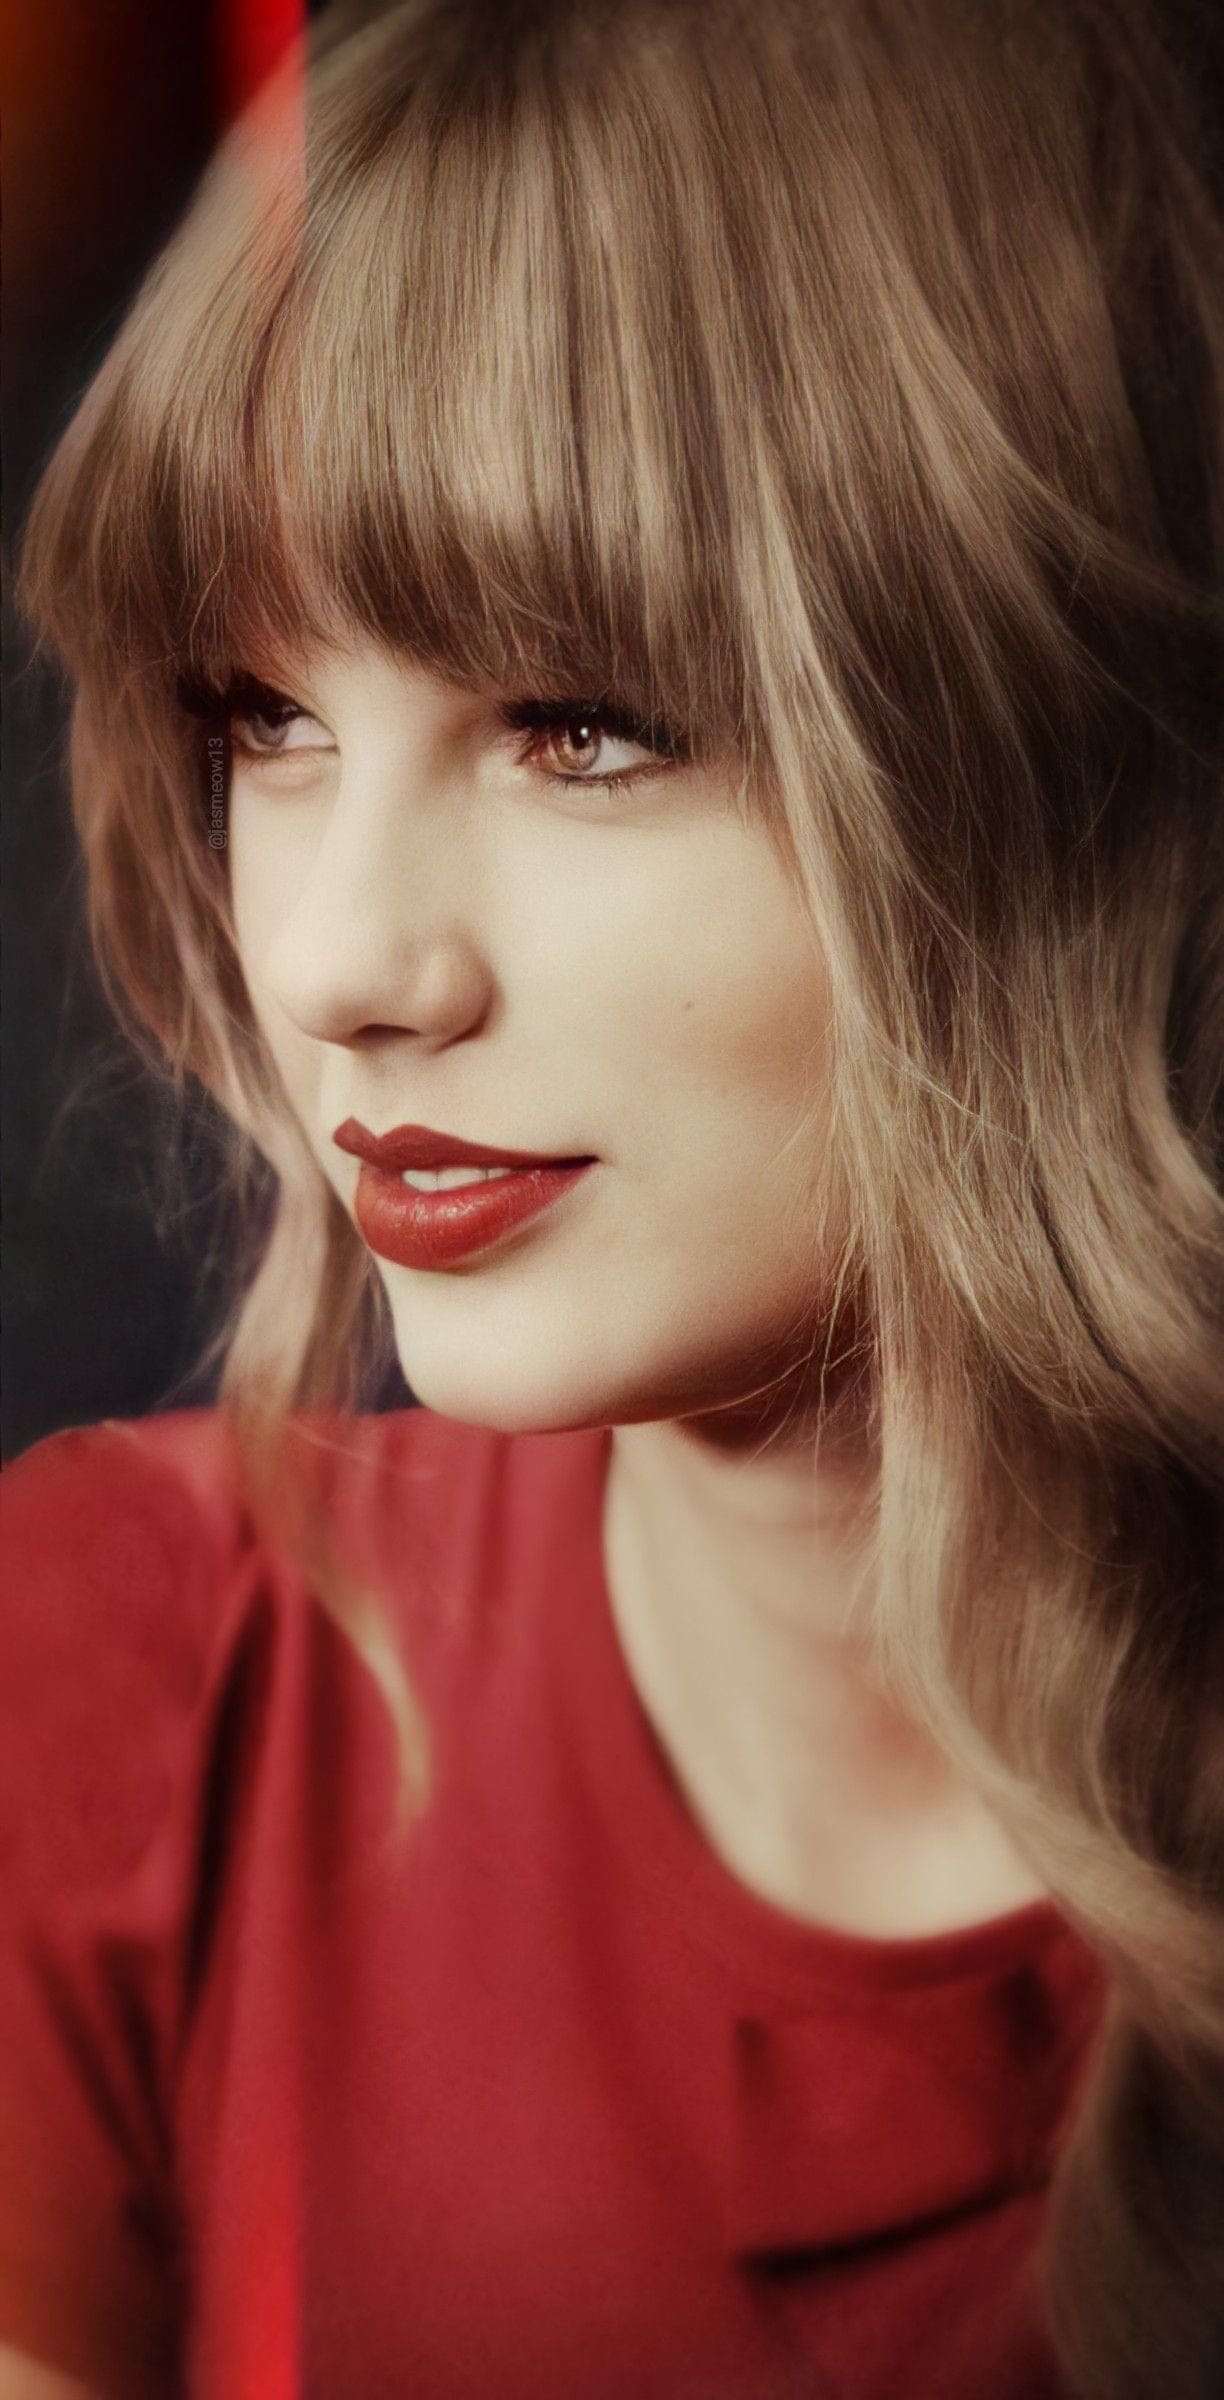 Taylor Swift Image For Wallpaper